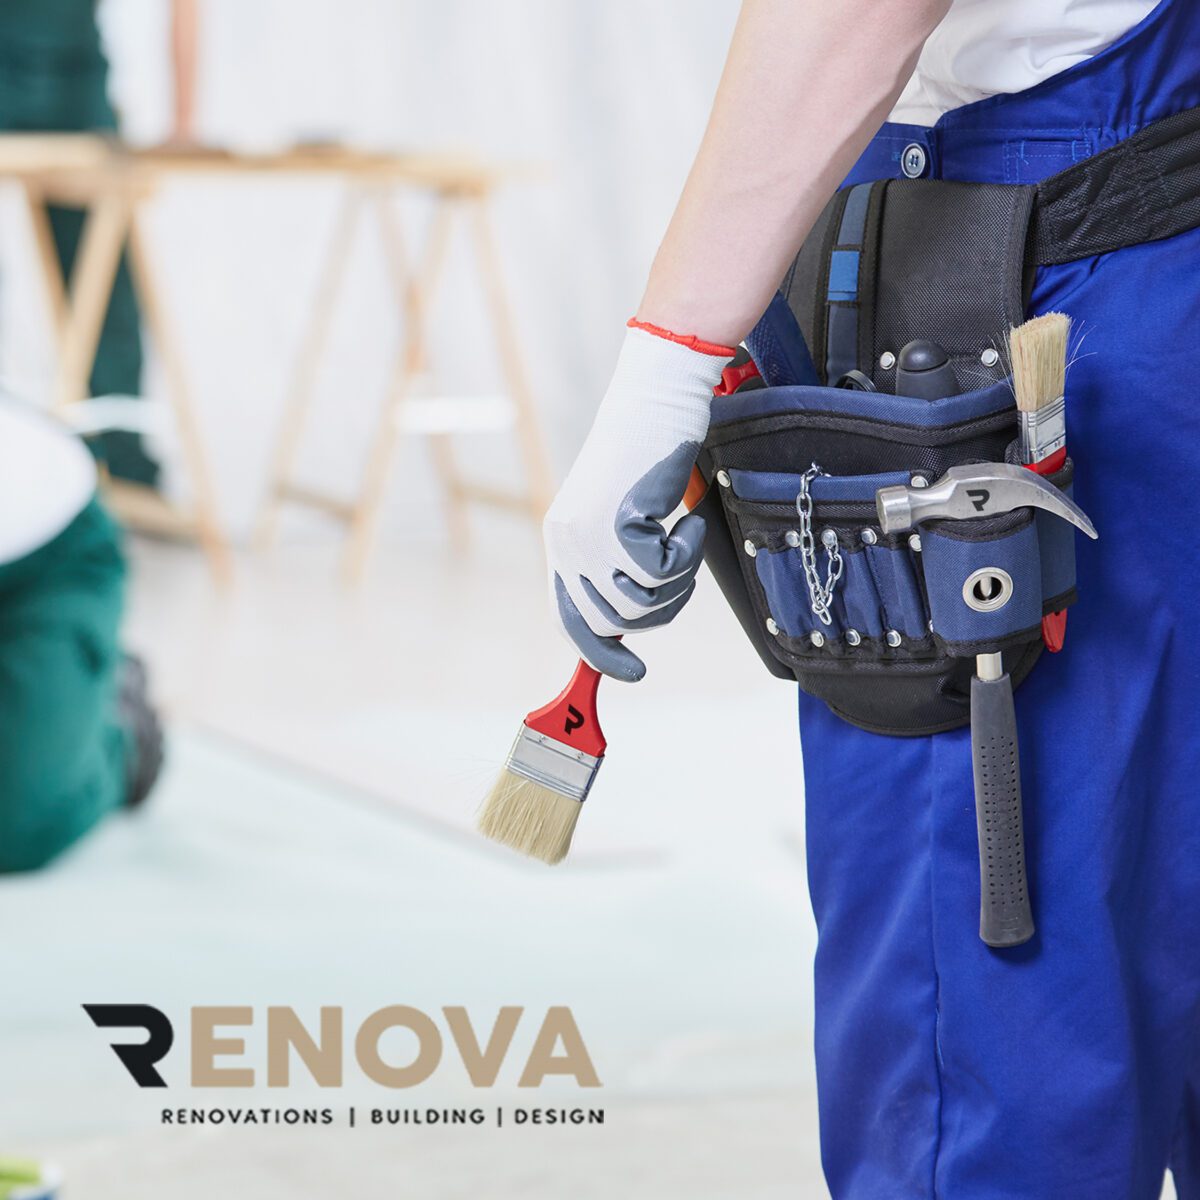 The Top 5 Reasons to Choose Renova for Your Renovation Needs